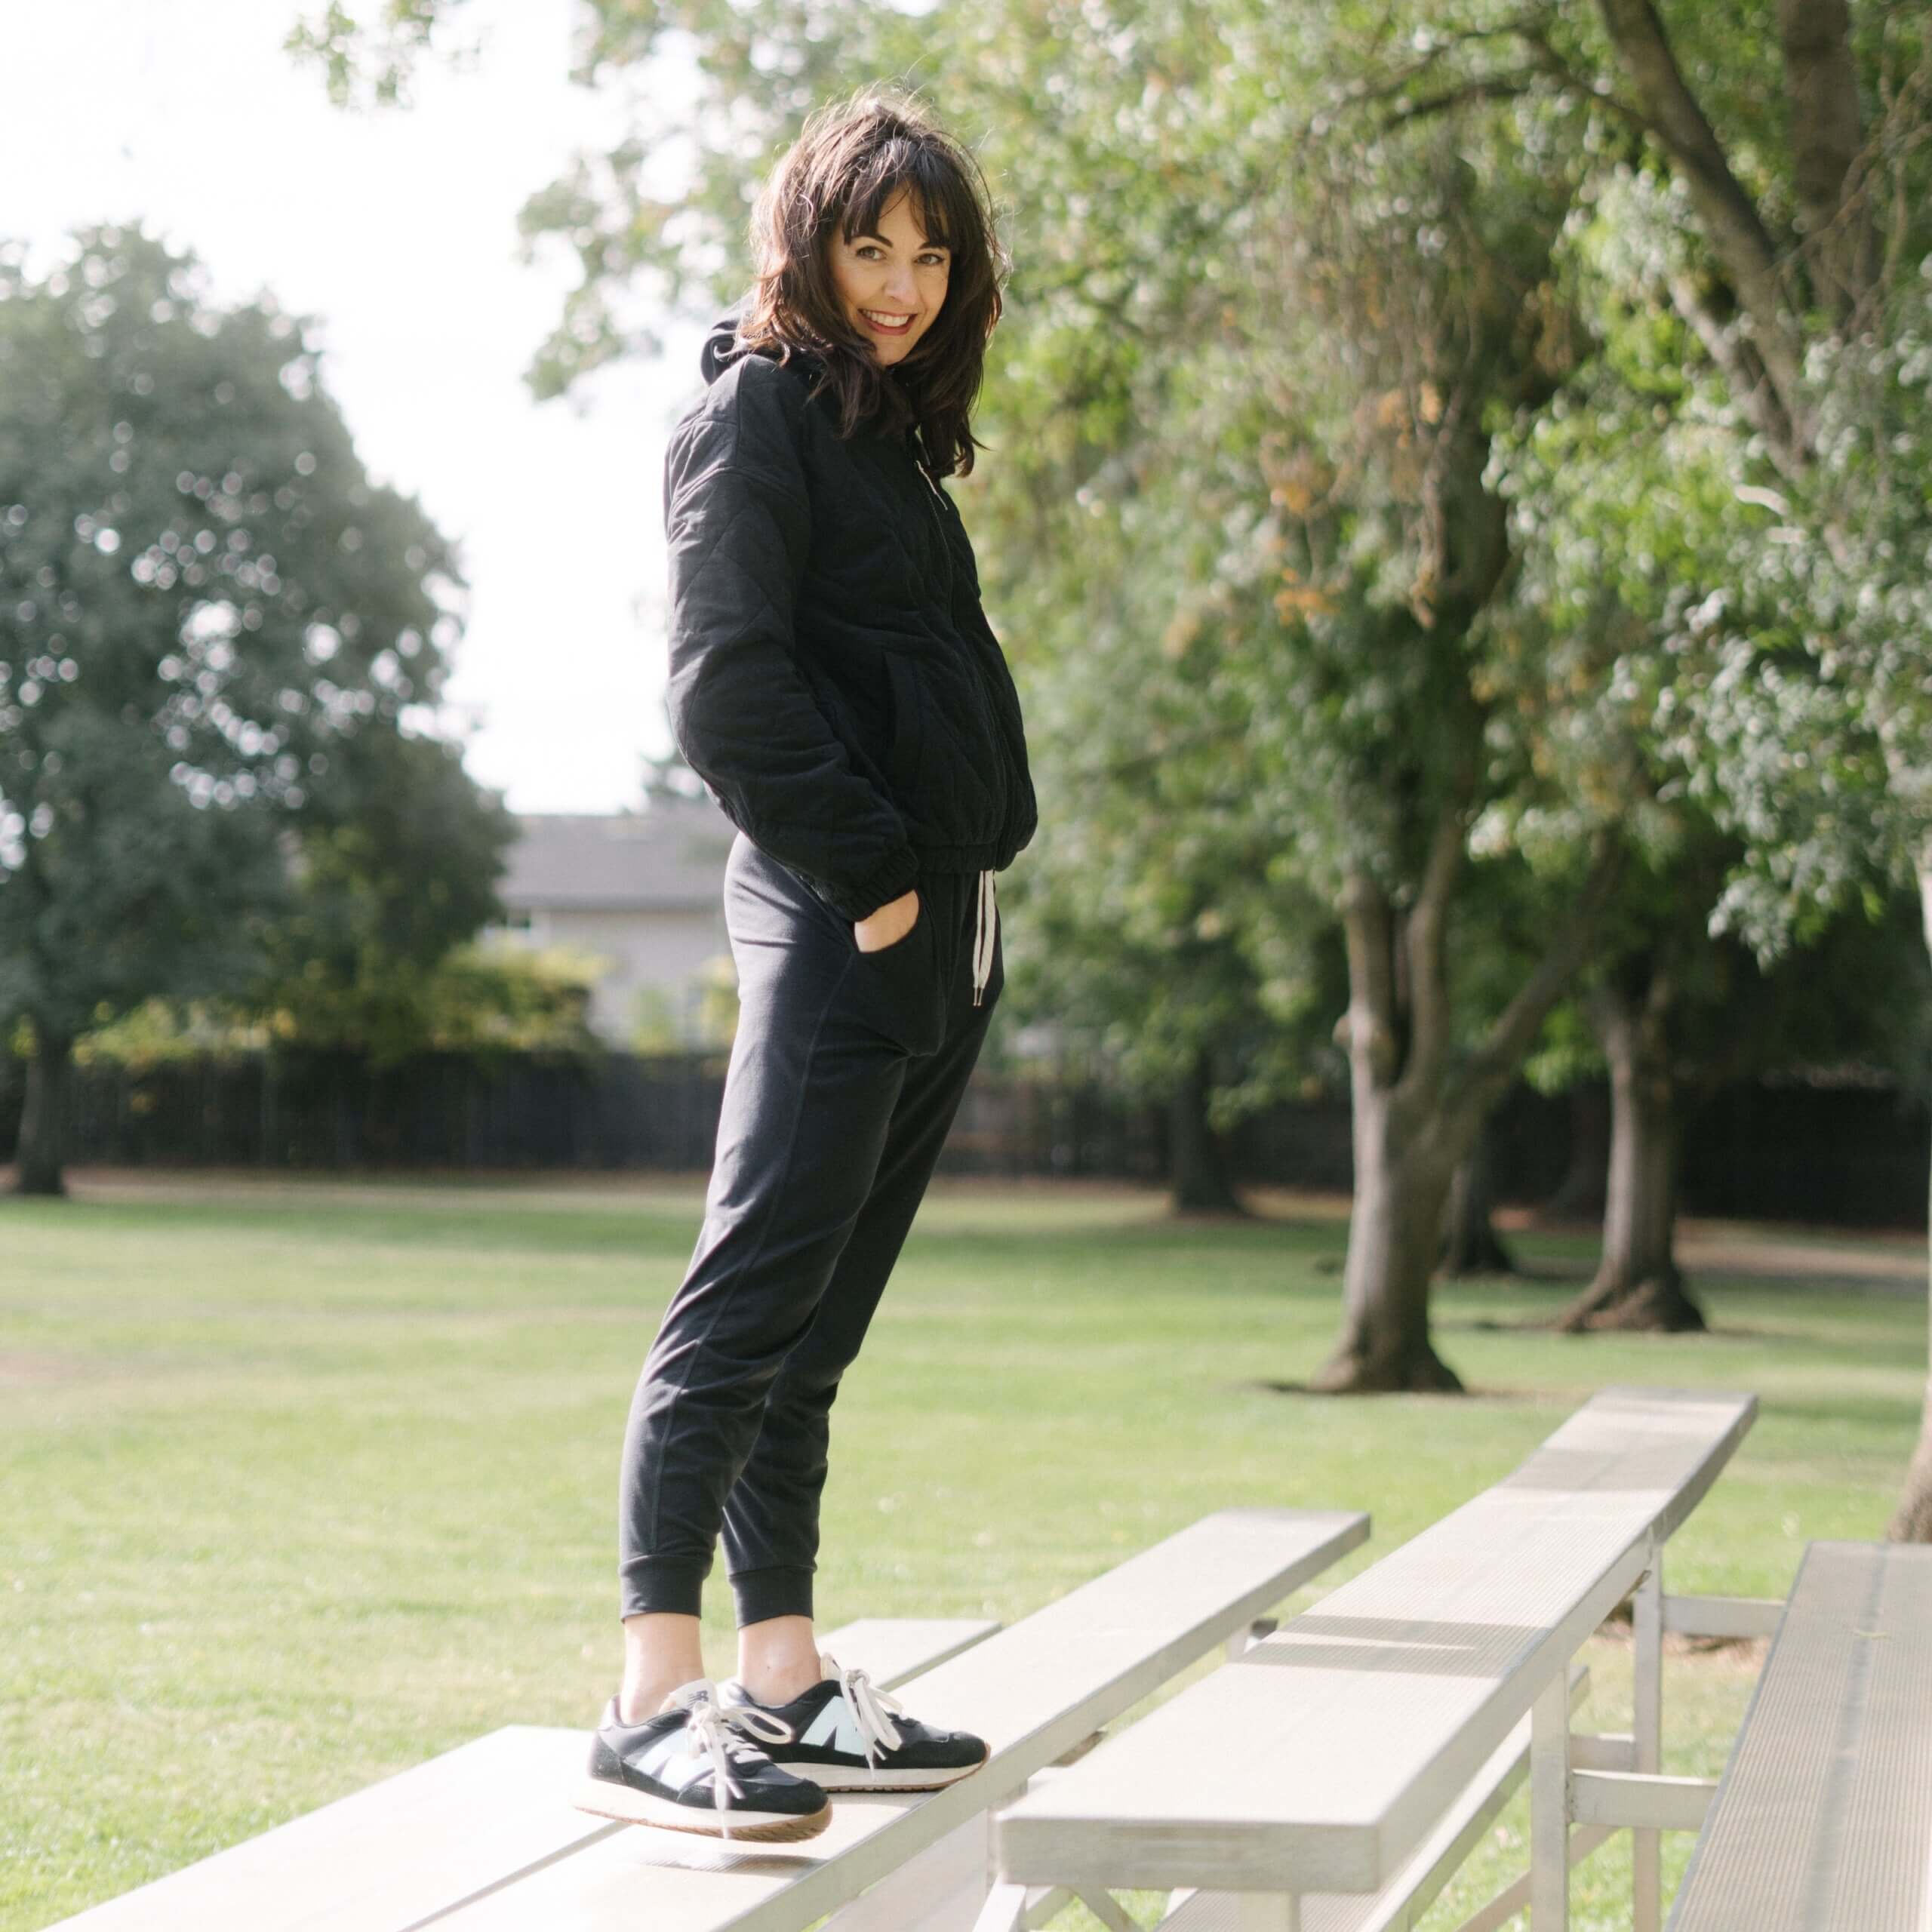 VUORI OUTFITS ARE MY SPORTY FALL CAPSULE WARDROBE GO-TOS